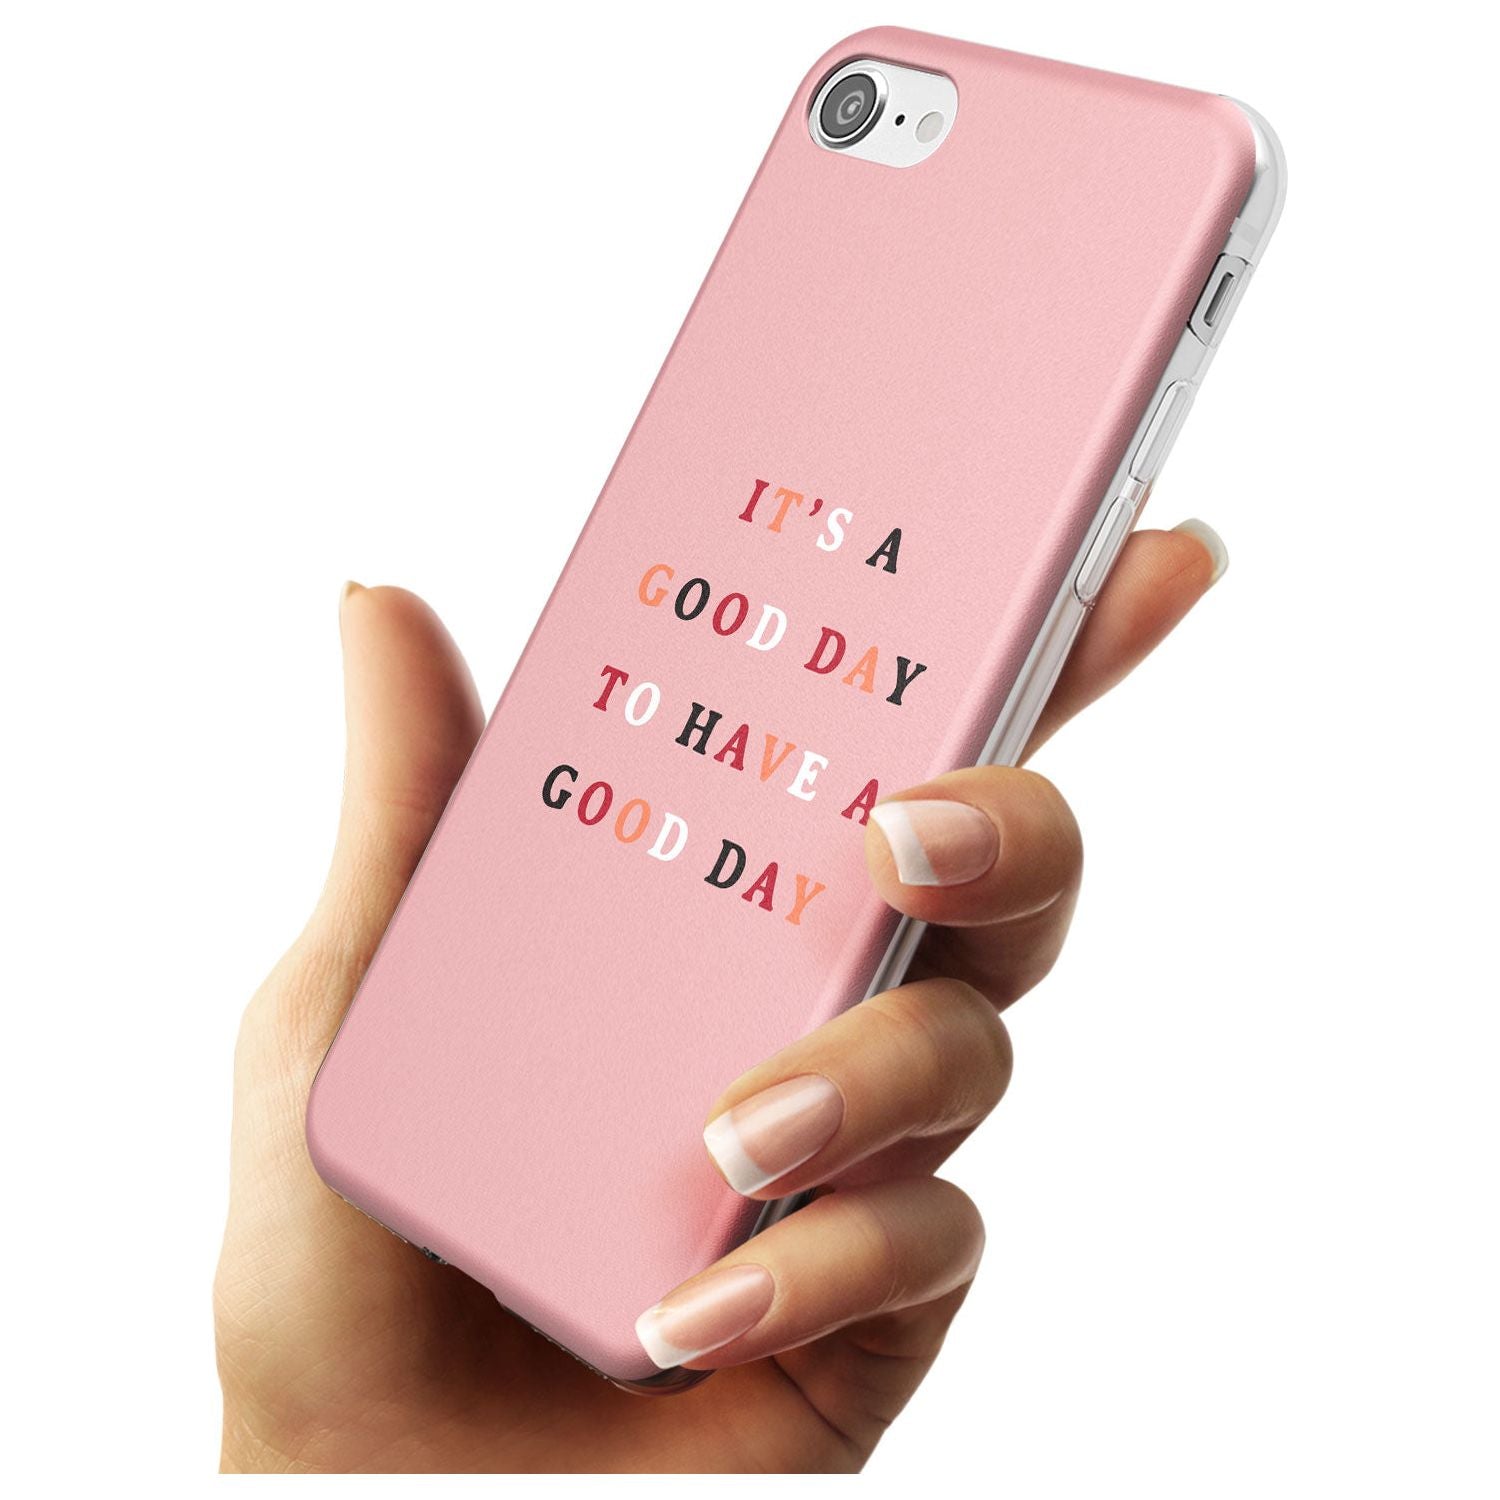 It's a good day to have a good day Slim TPU Phone Case for iPhone SE 8 7 Plus